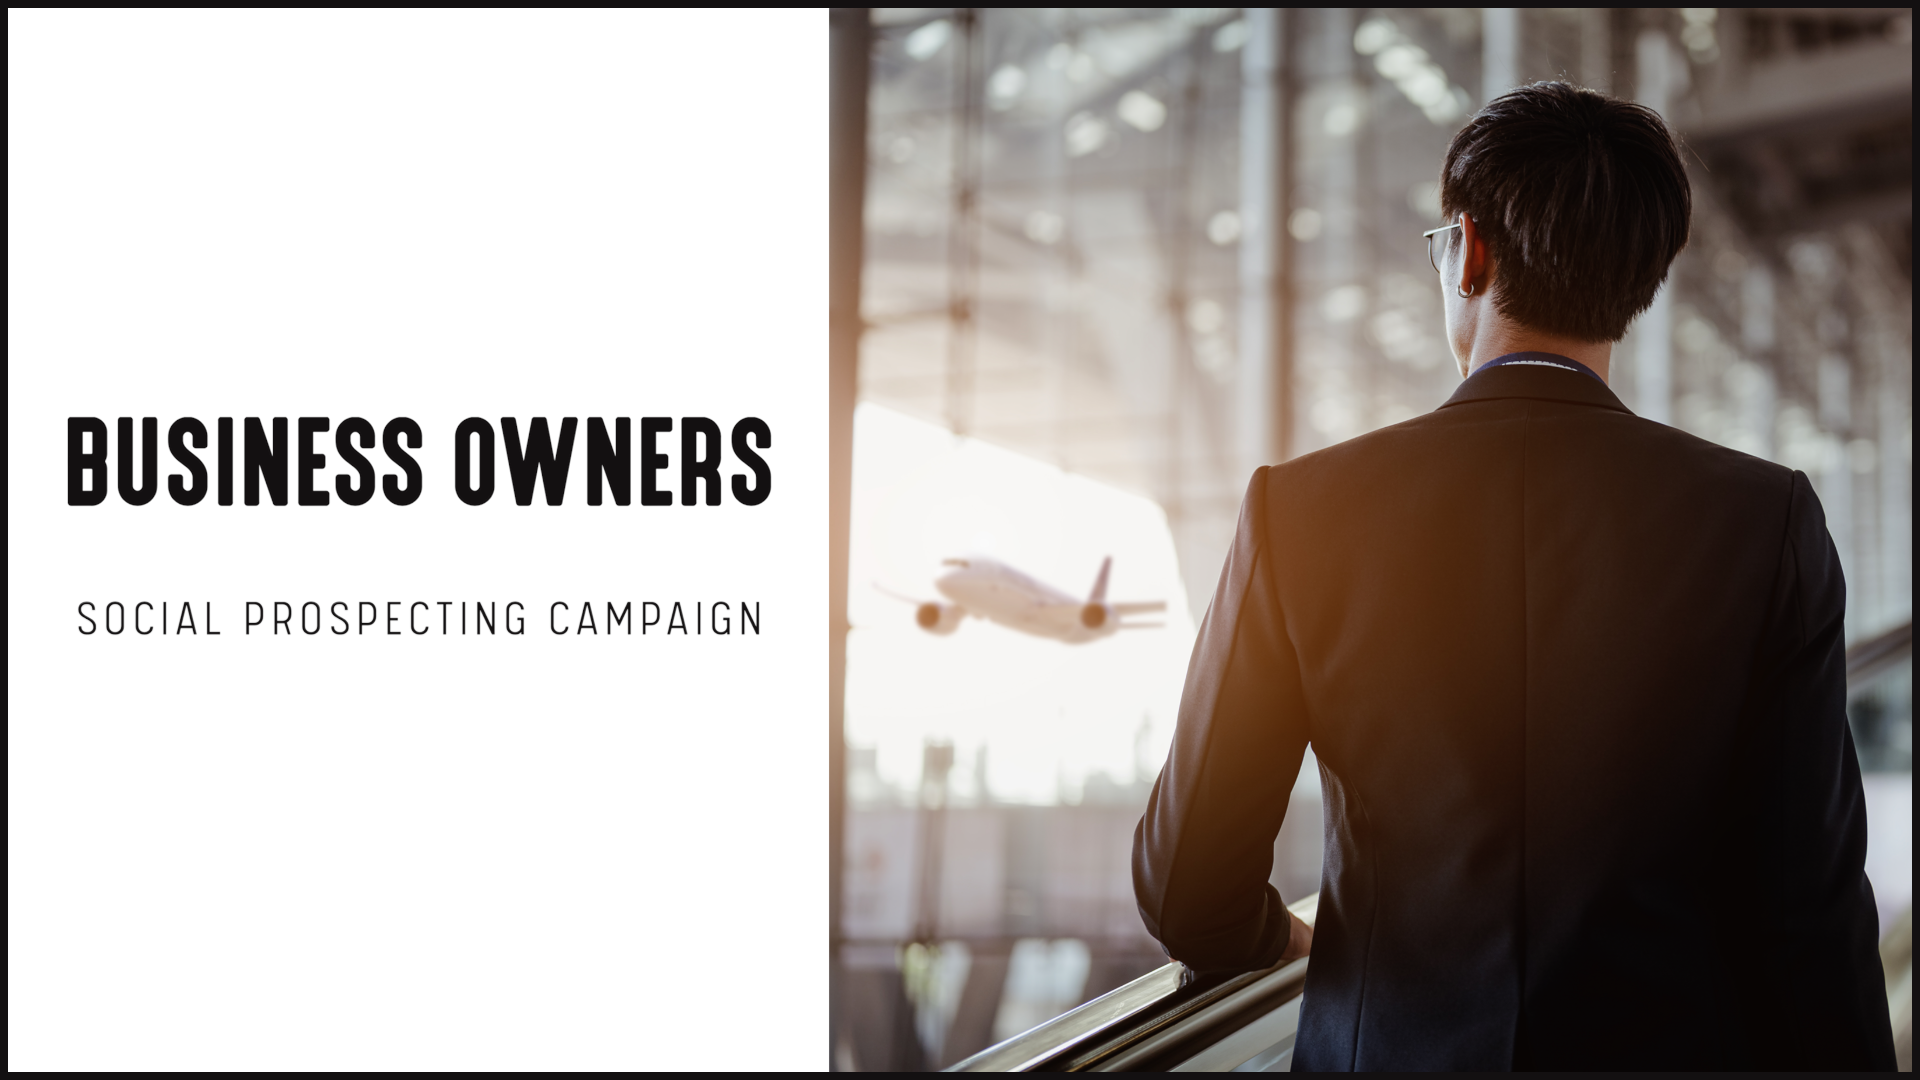 [NEW] Social Prospecting Campaign | Business Owners